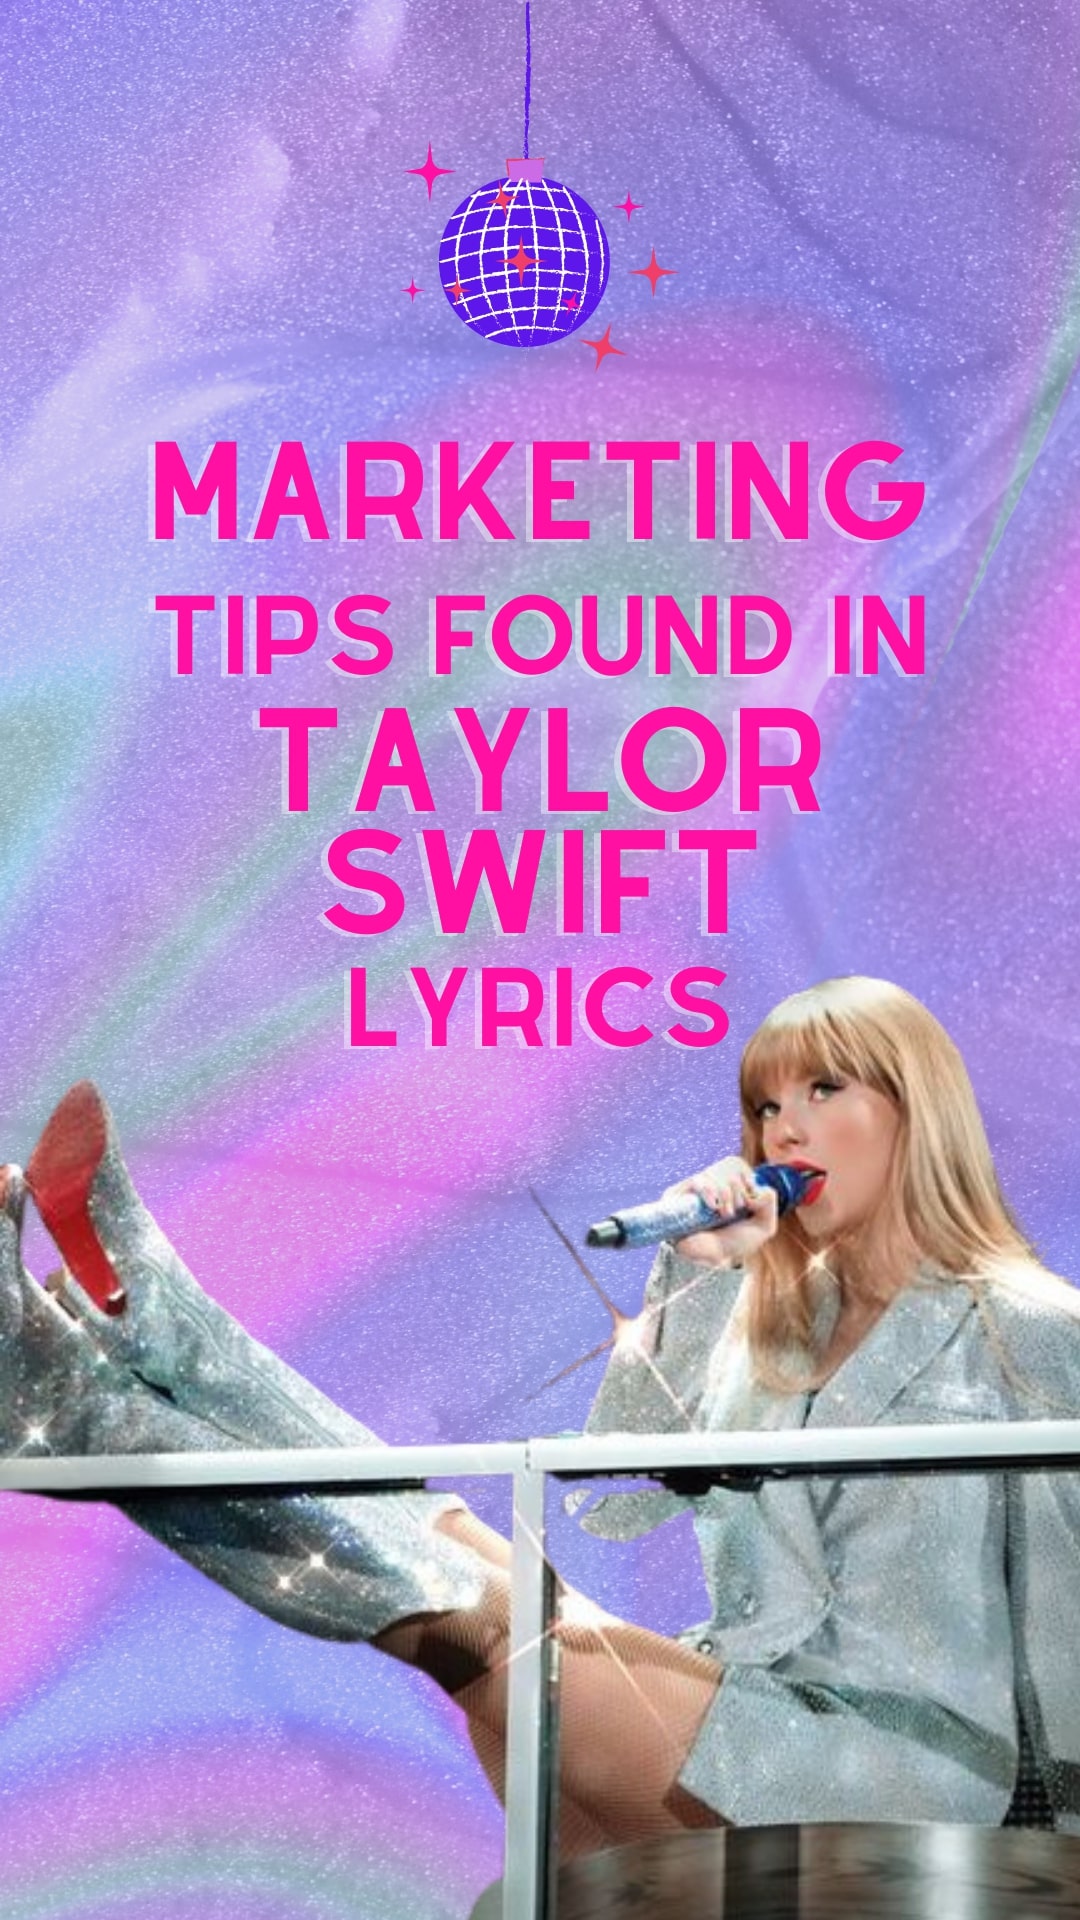 Blog cover image showing Taylor Swift at a live concert